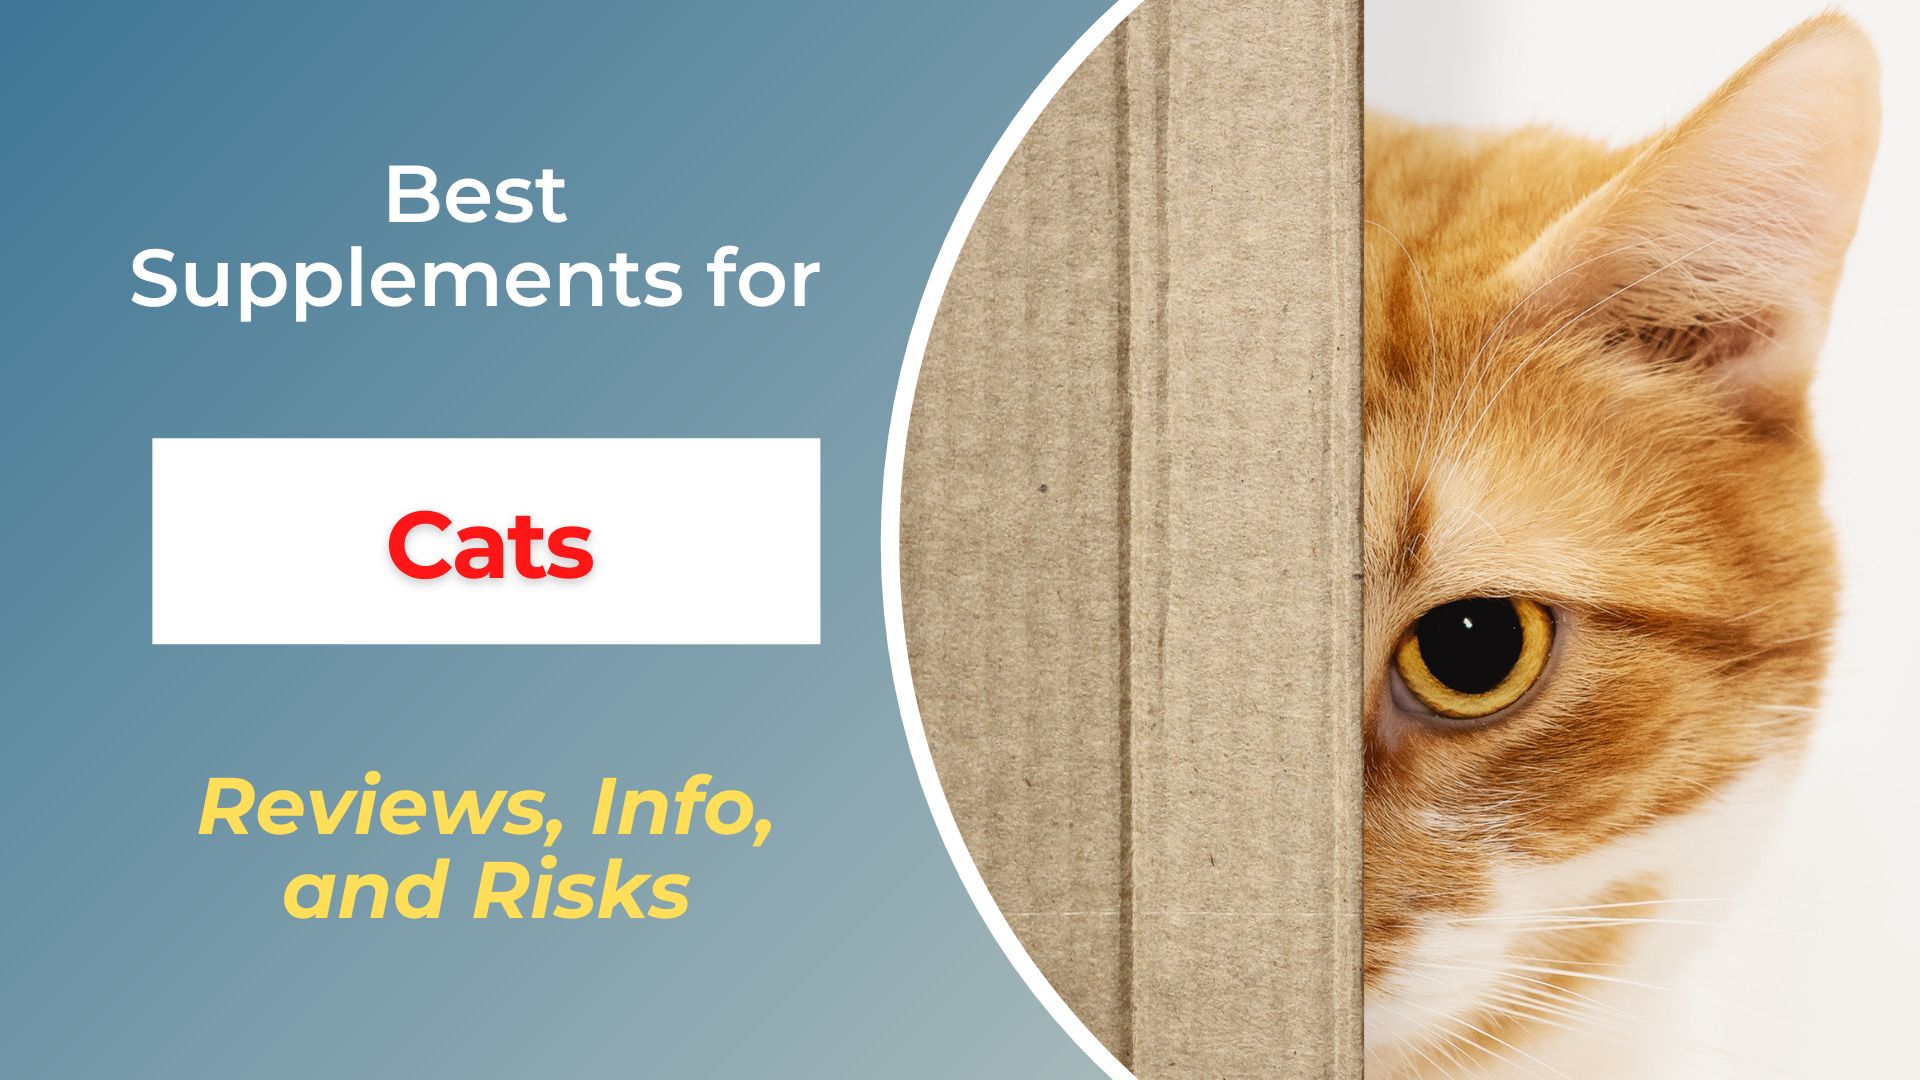 Best Supplements for Cats